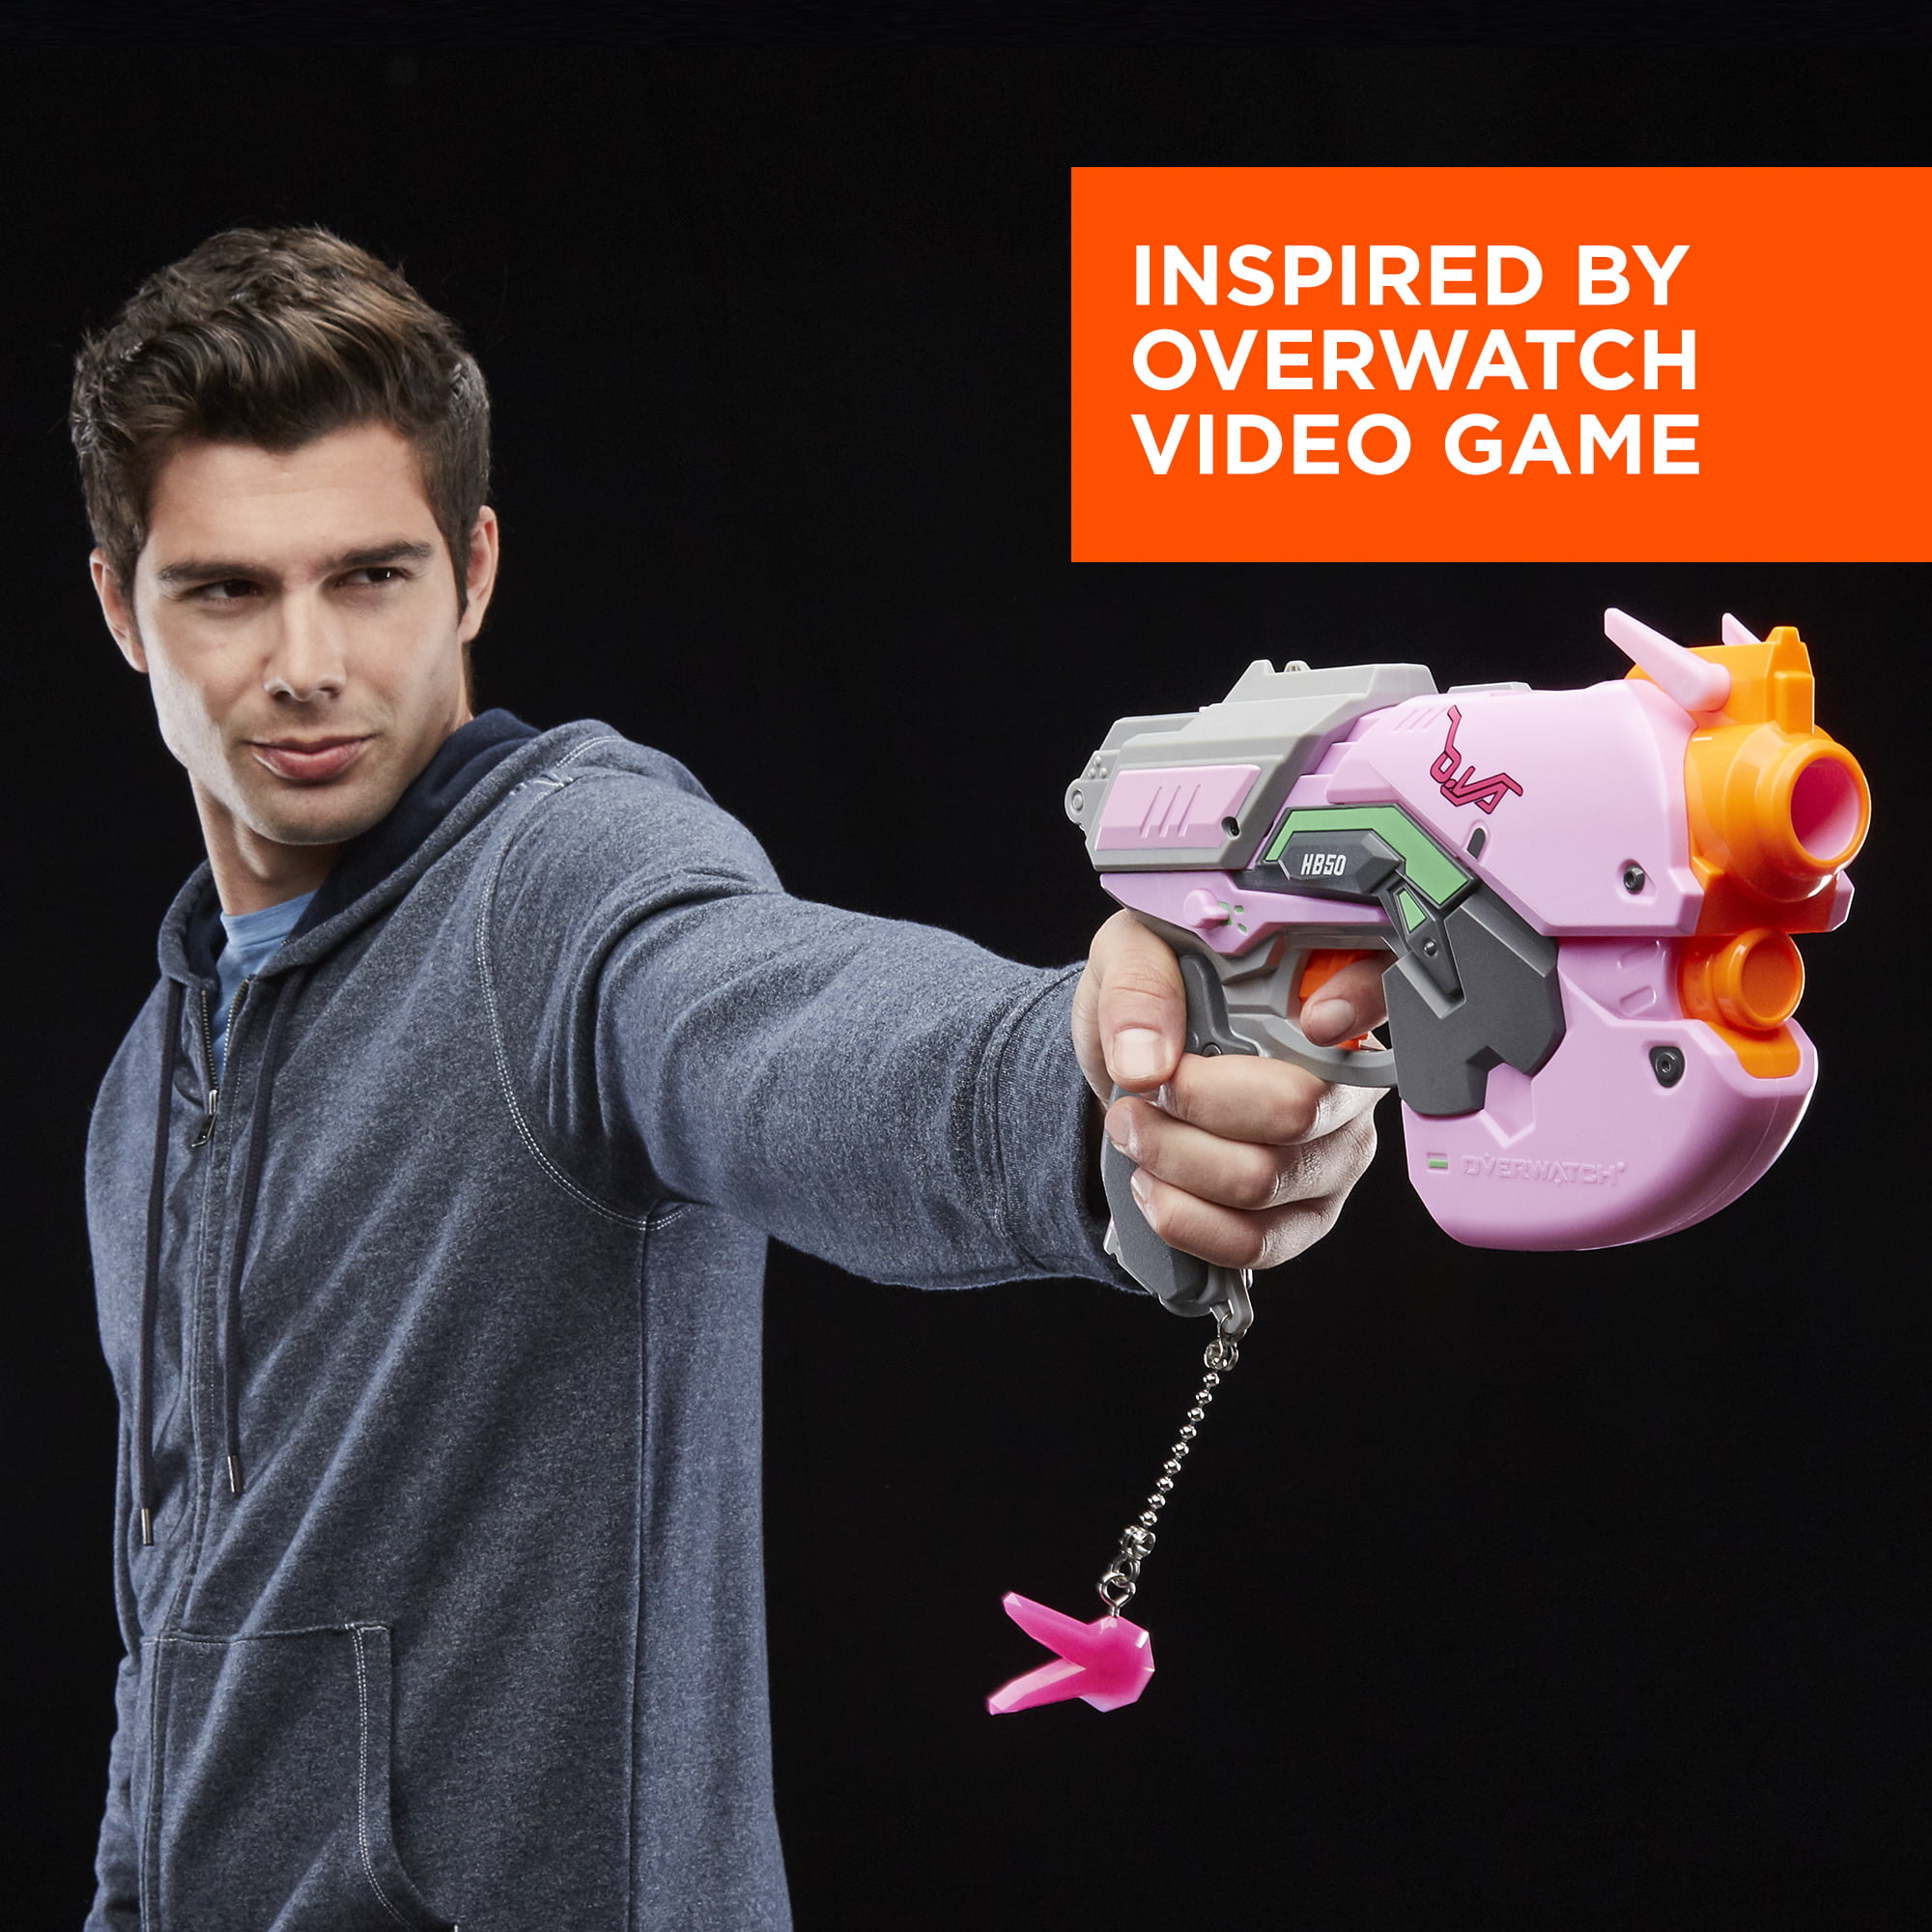 NERF Overwatch D.va Rival Blaster With 3 30x High Impact Rounds for sale online